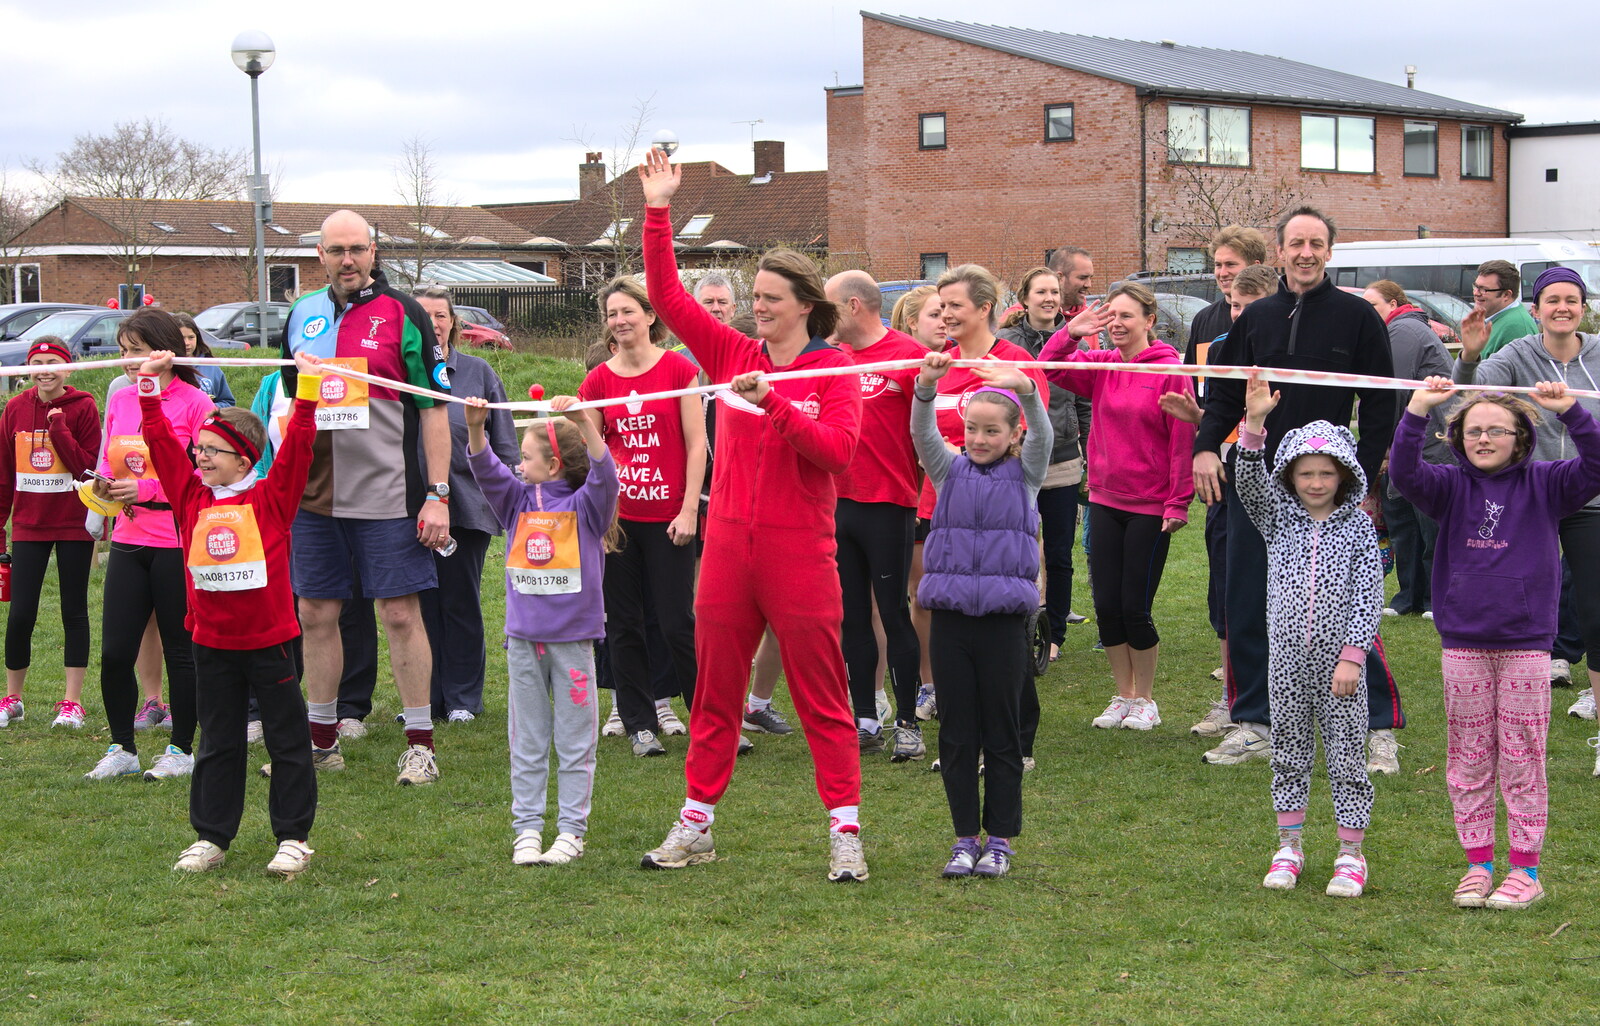 At the starting line, the run is about to kick off from Isobel's Fun Run, Hartismere High, Eye, Suffolk - 23rd March 2014